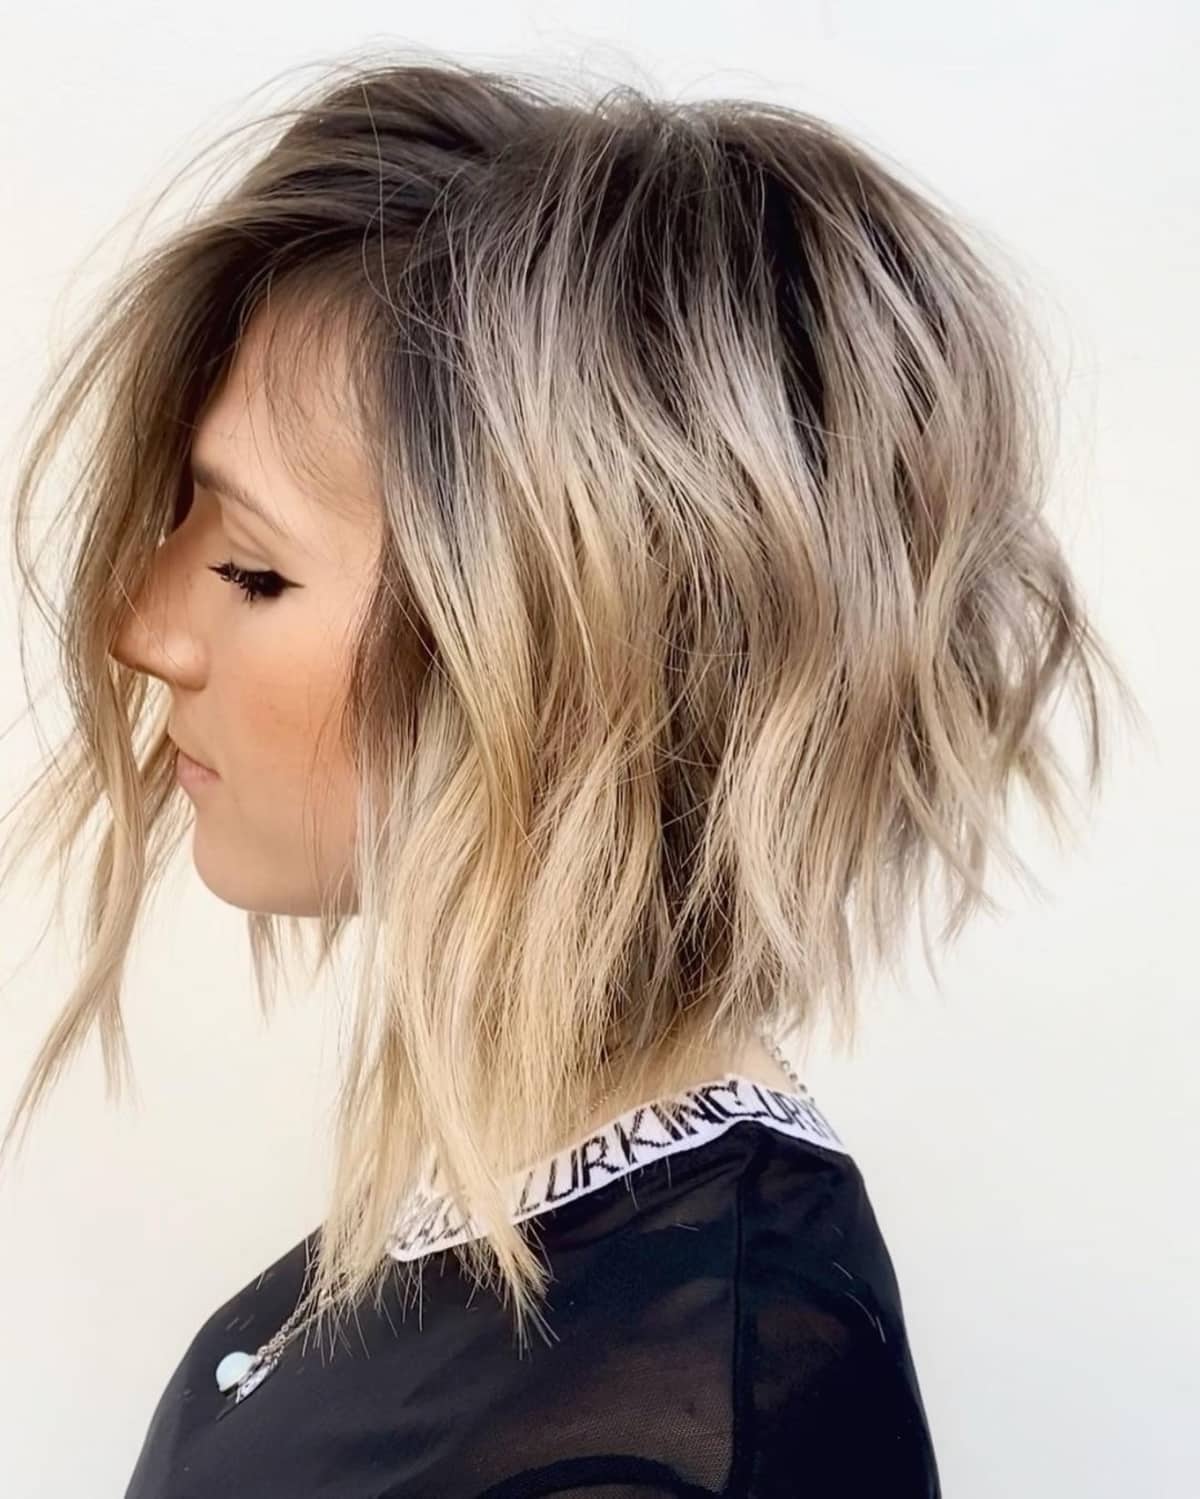 Latest Short Layered Hairstyles for Women